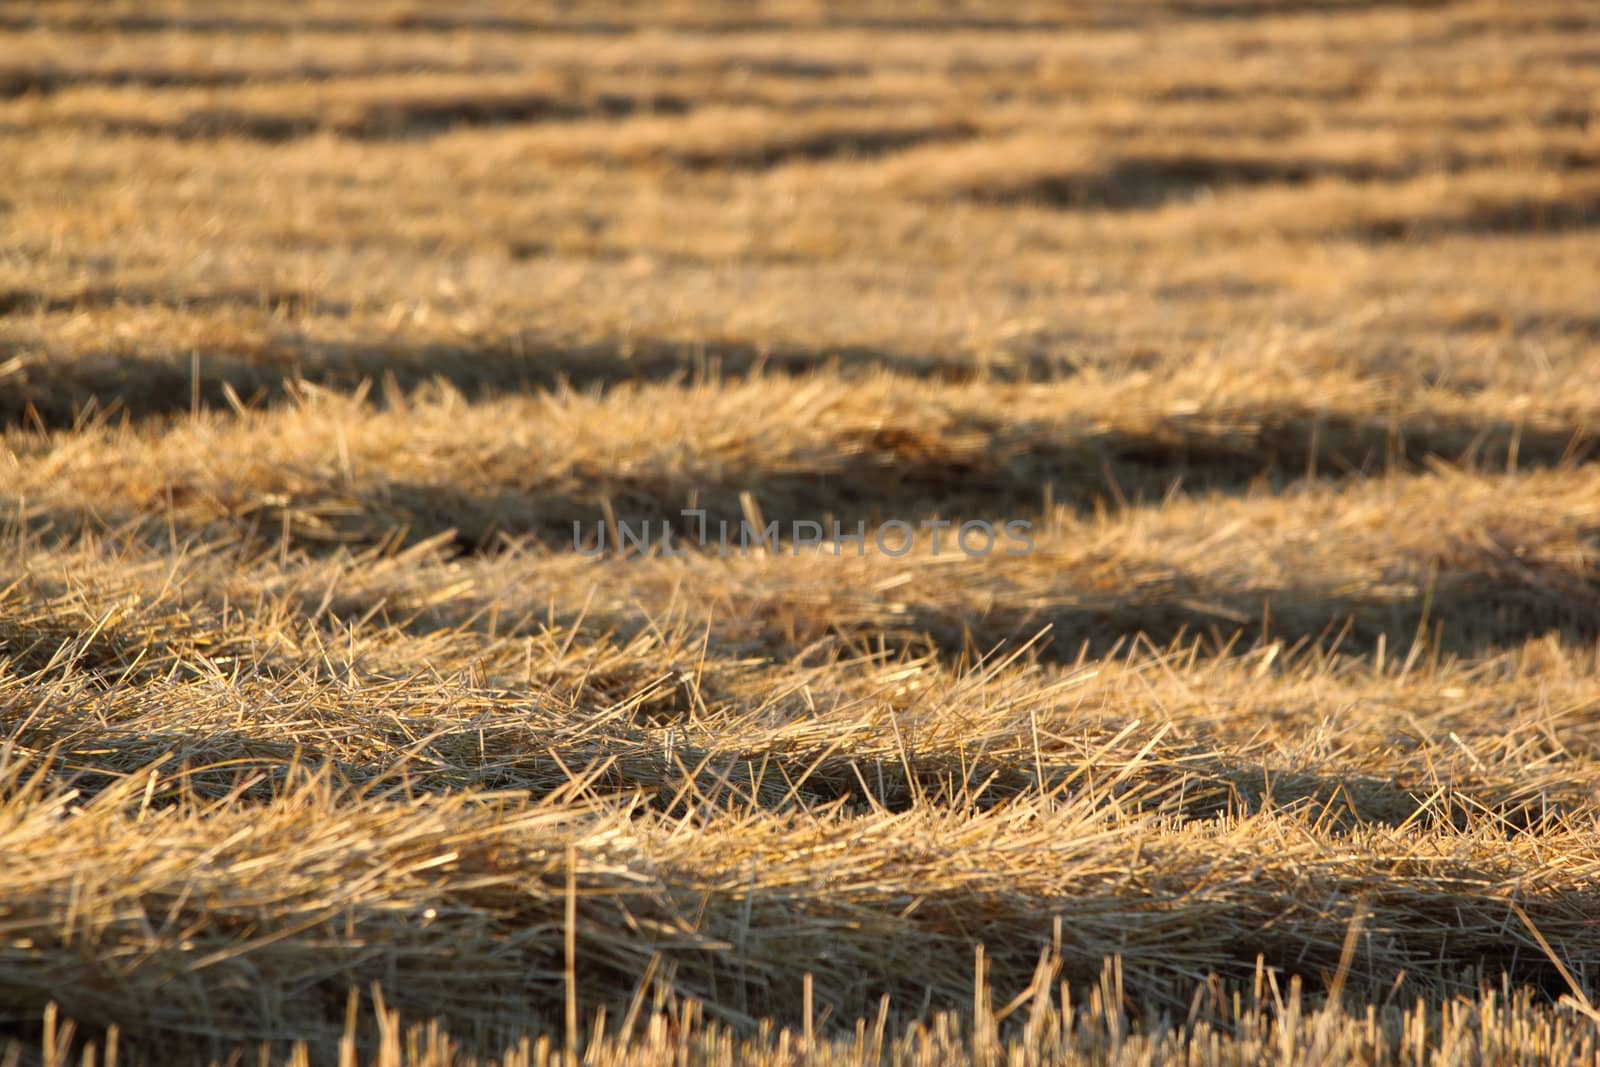 detail of straw on harvested field